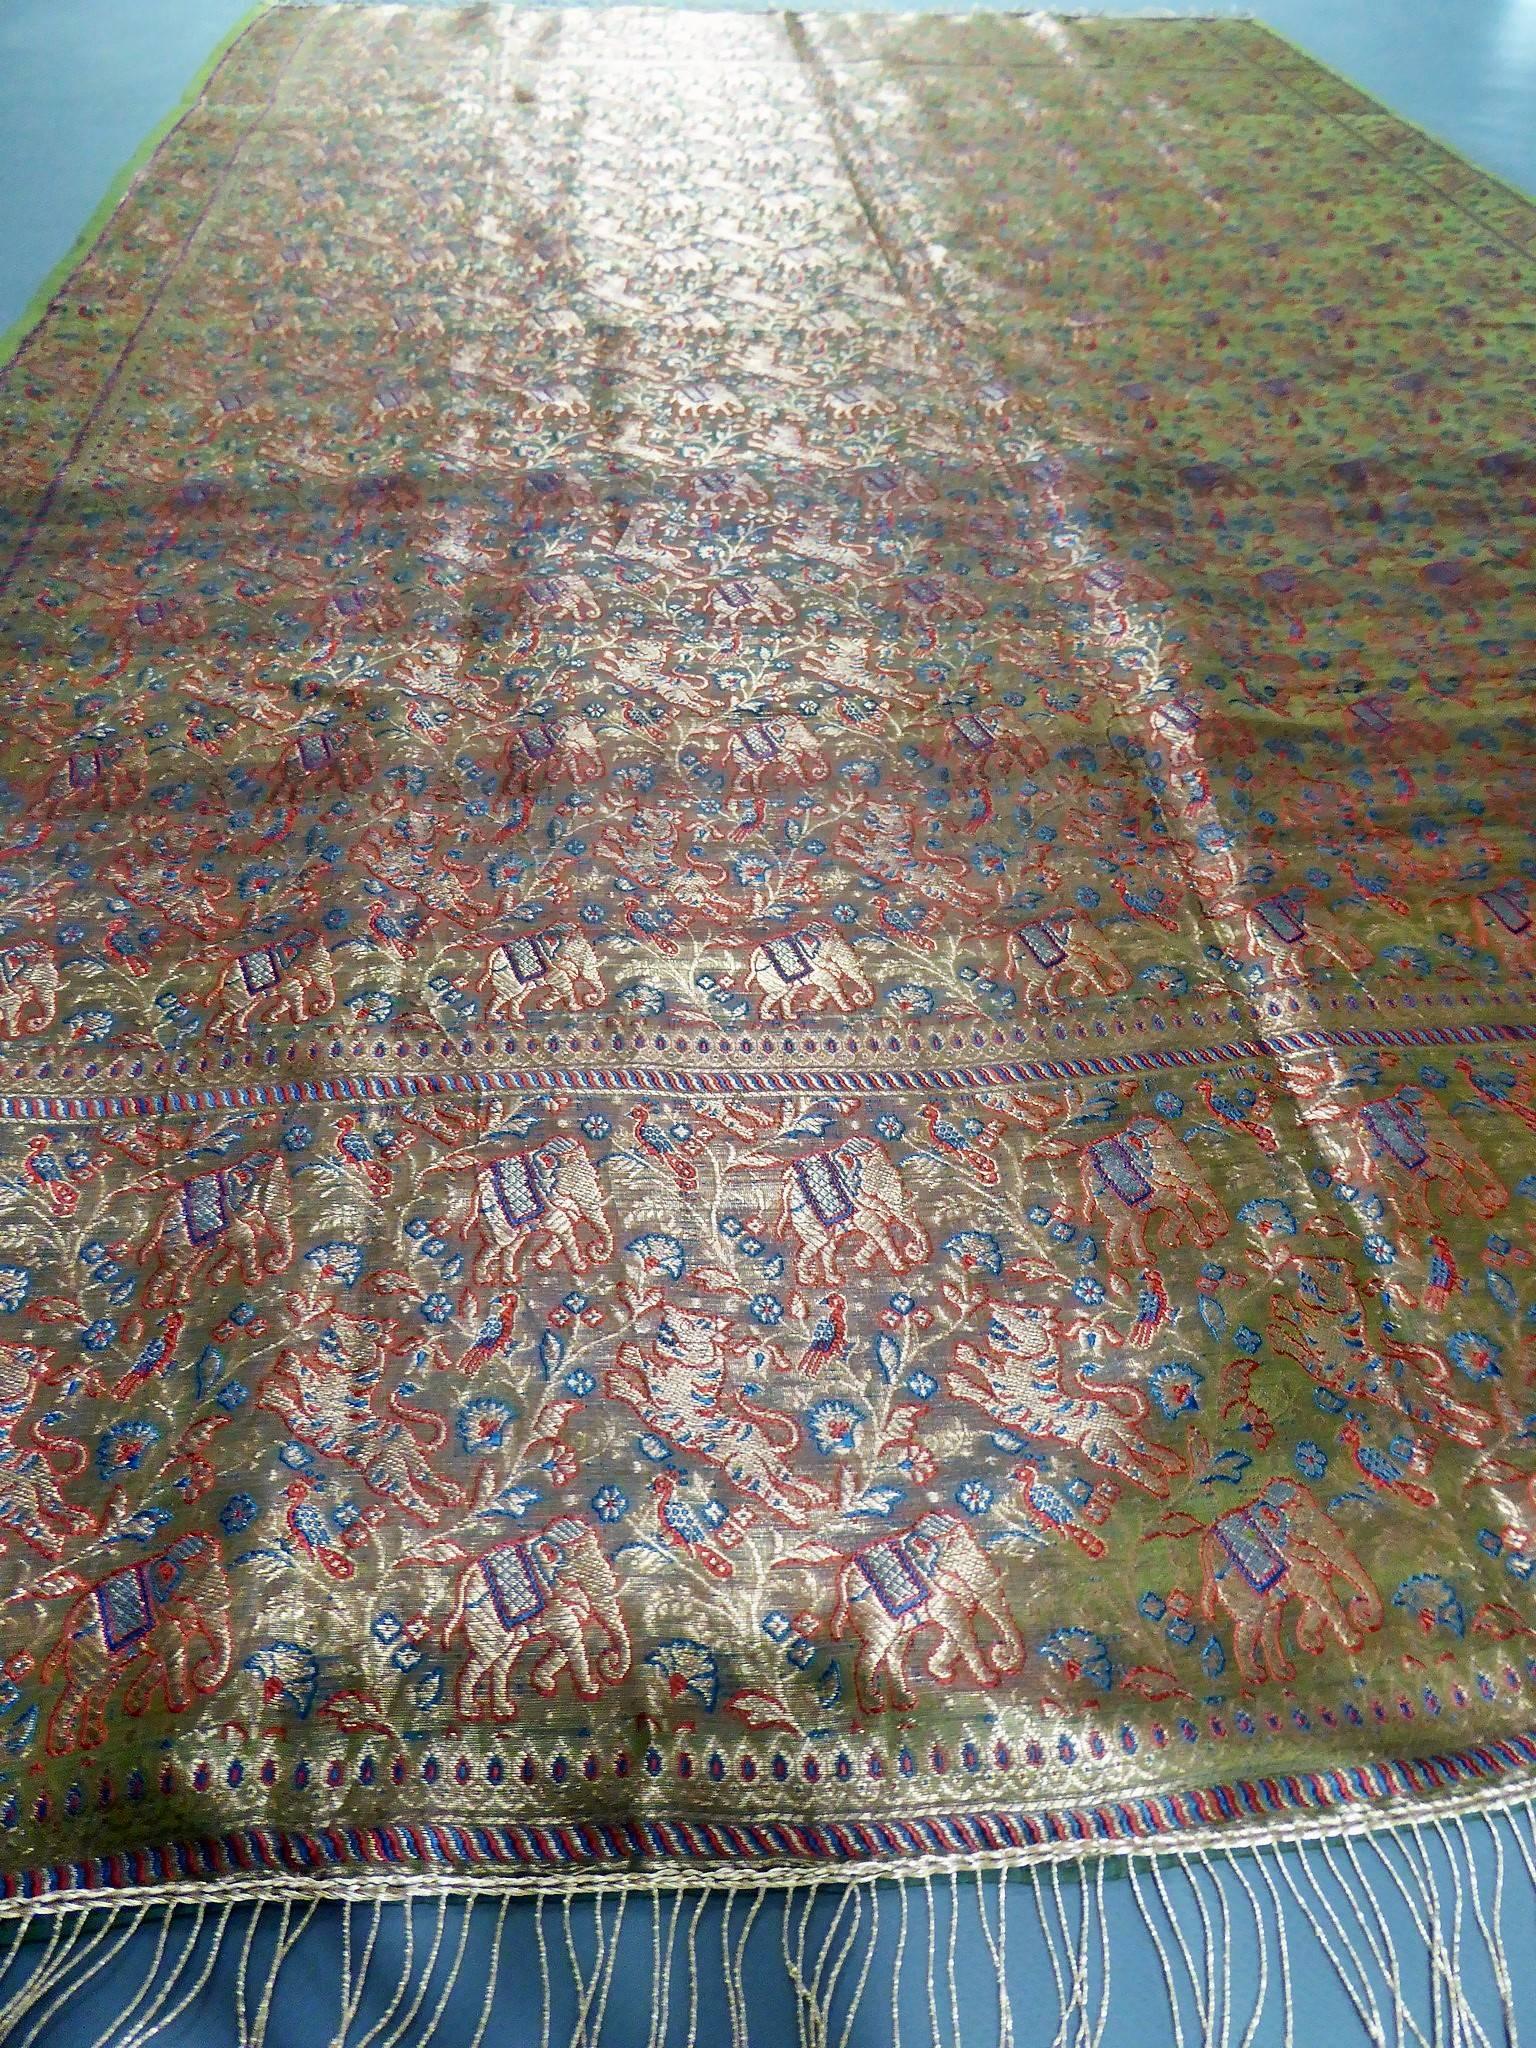 Before 1950

India for the domestic market 

Superb long silk woven shawl made in India for the domestic market probably around 1920/1930. Shawl with a background full of decorations of elephant and tiger garlands, separated at the ends by a red and